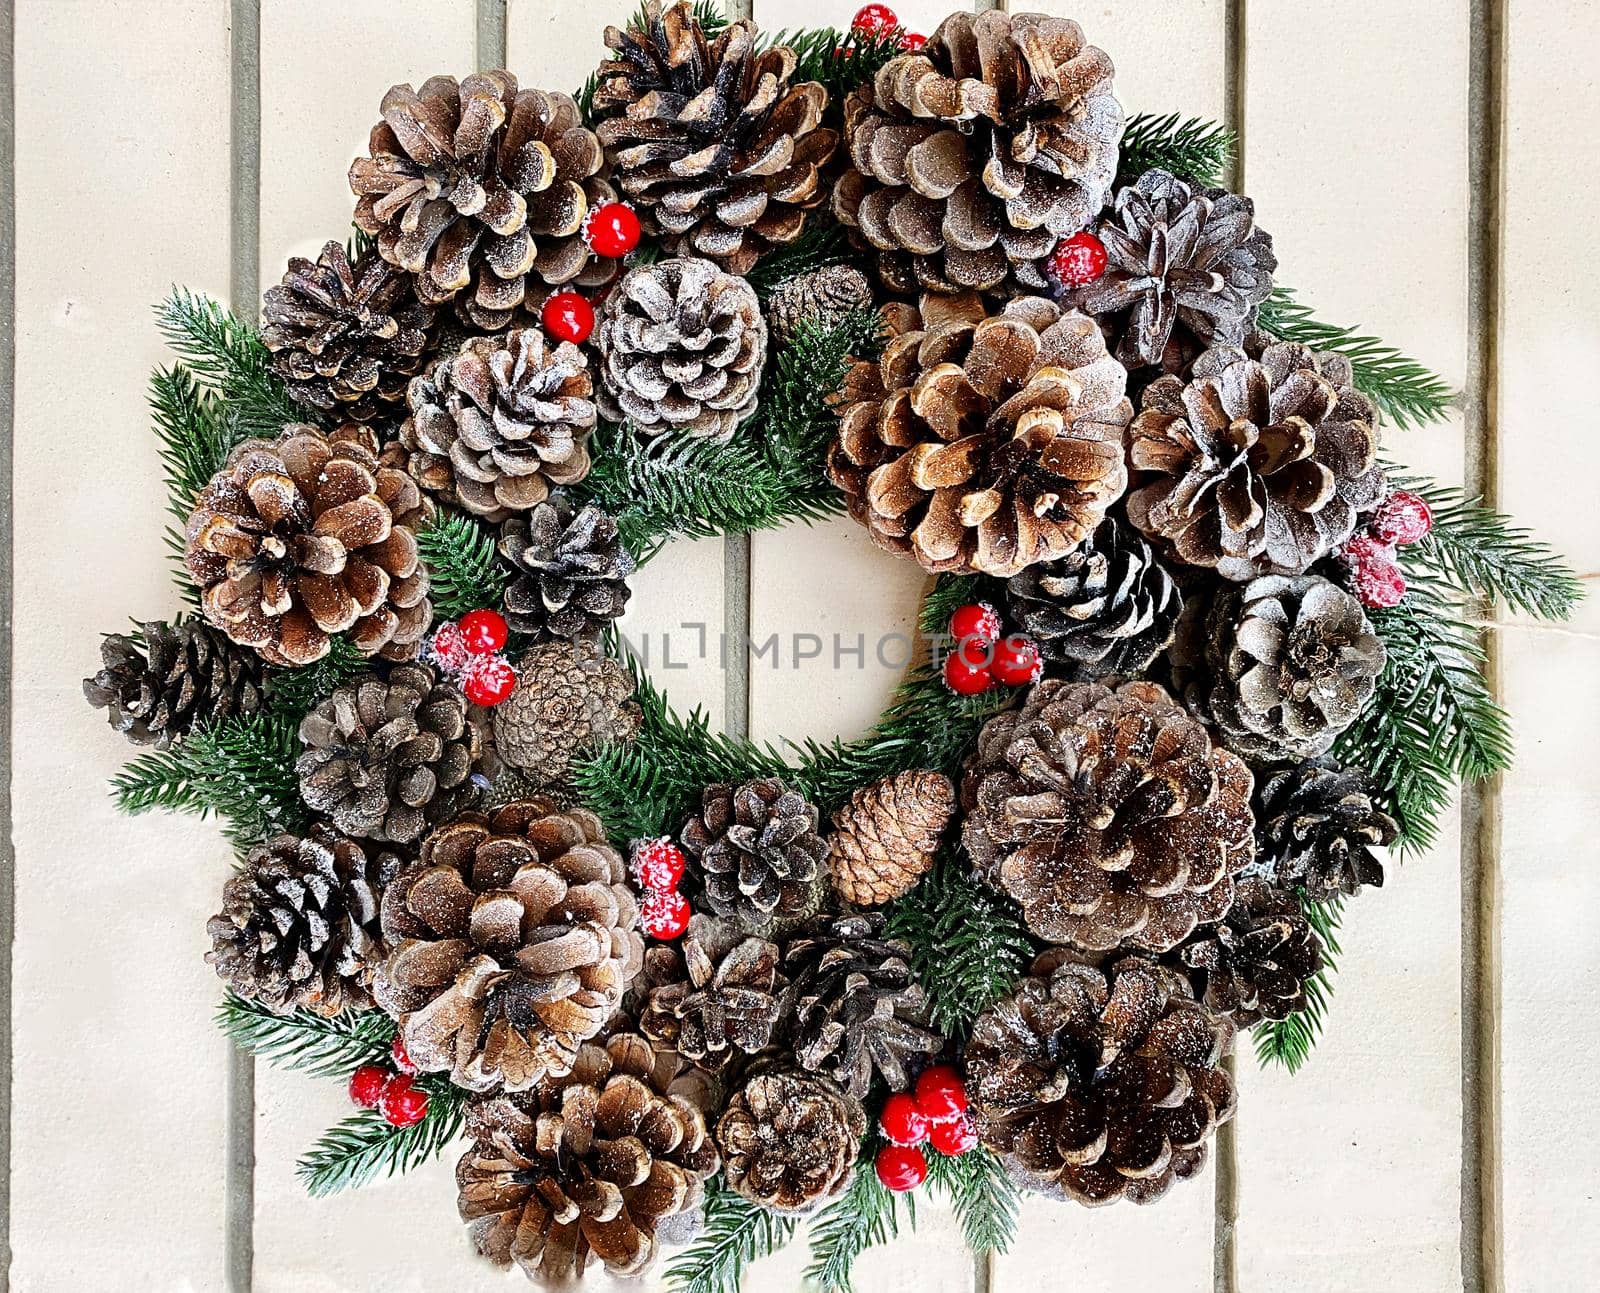 Christmas decorative wreath of ivy, mistletoe, cedar and deciduous twigs with pine cones on a white brick wall background.